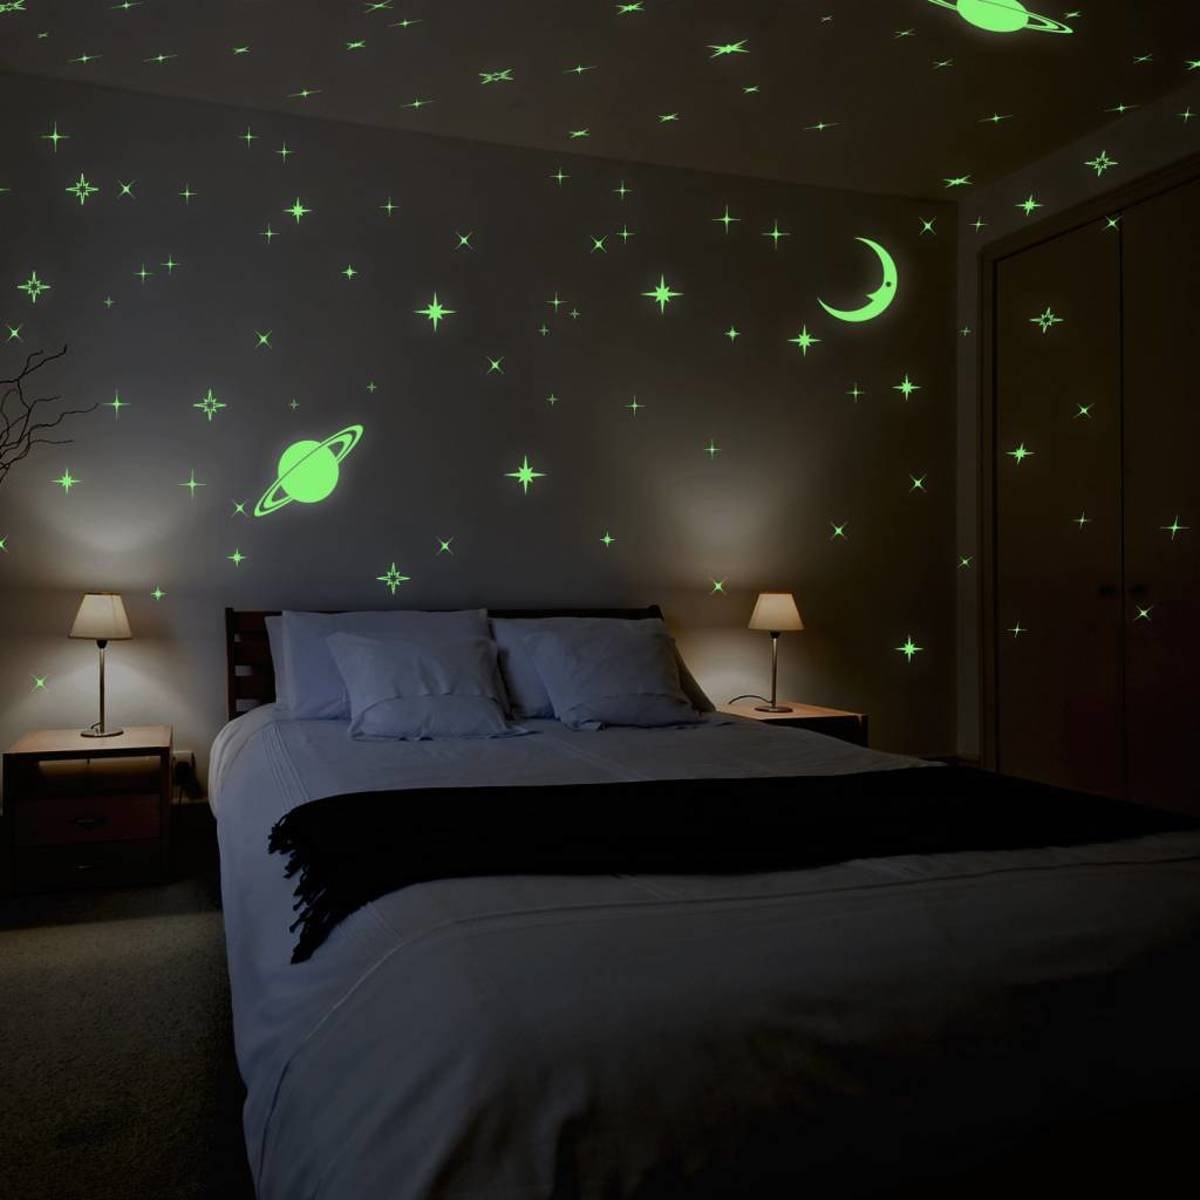 Projector lamp 10 Fun Nightlights for Your Child's Room